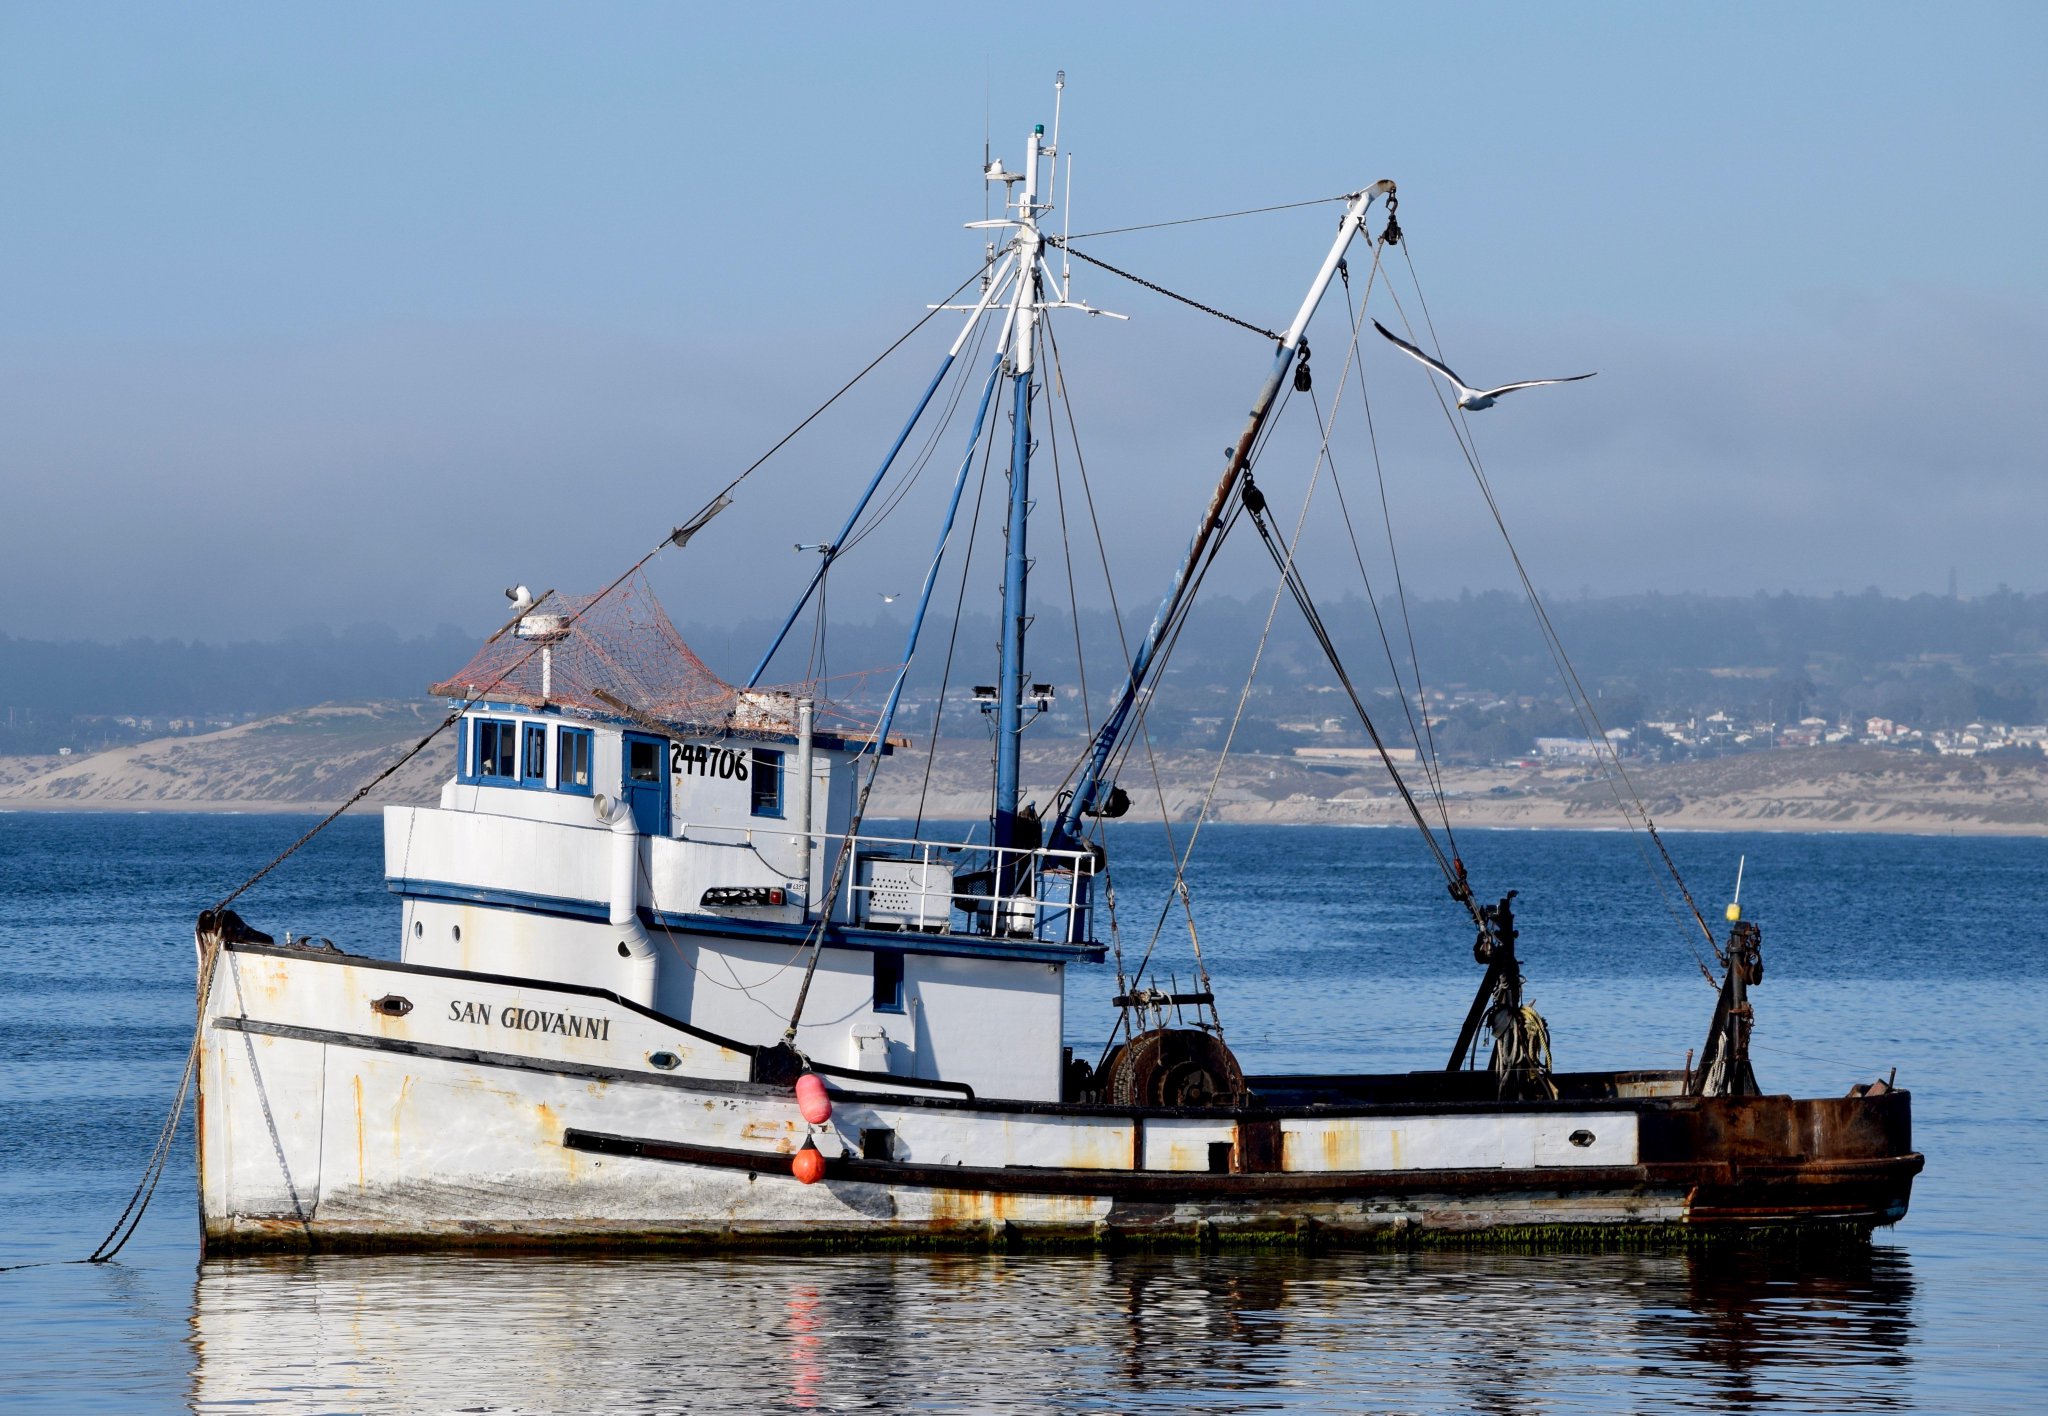 City of Monterey on X: Iconic #fishing boat the San Giovanni, the last  remaining large scale wooden fishing vessel in #Monterey, has been hauled  out to dry dock for renovation. The ship